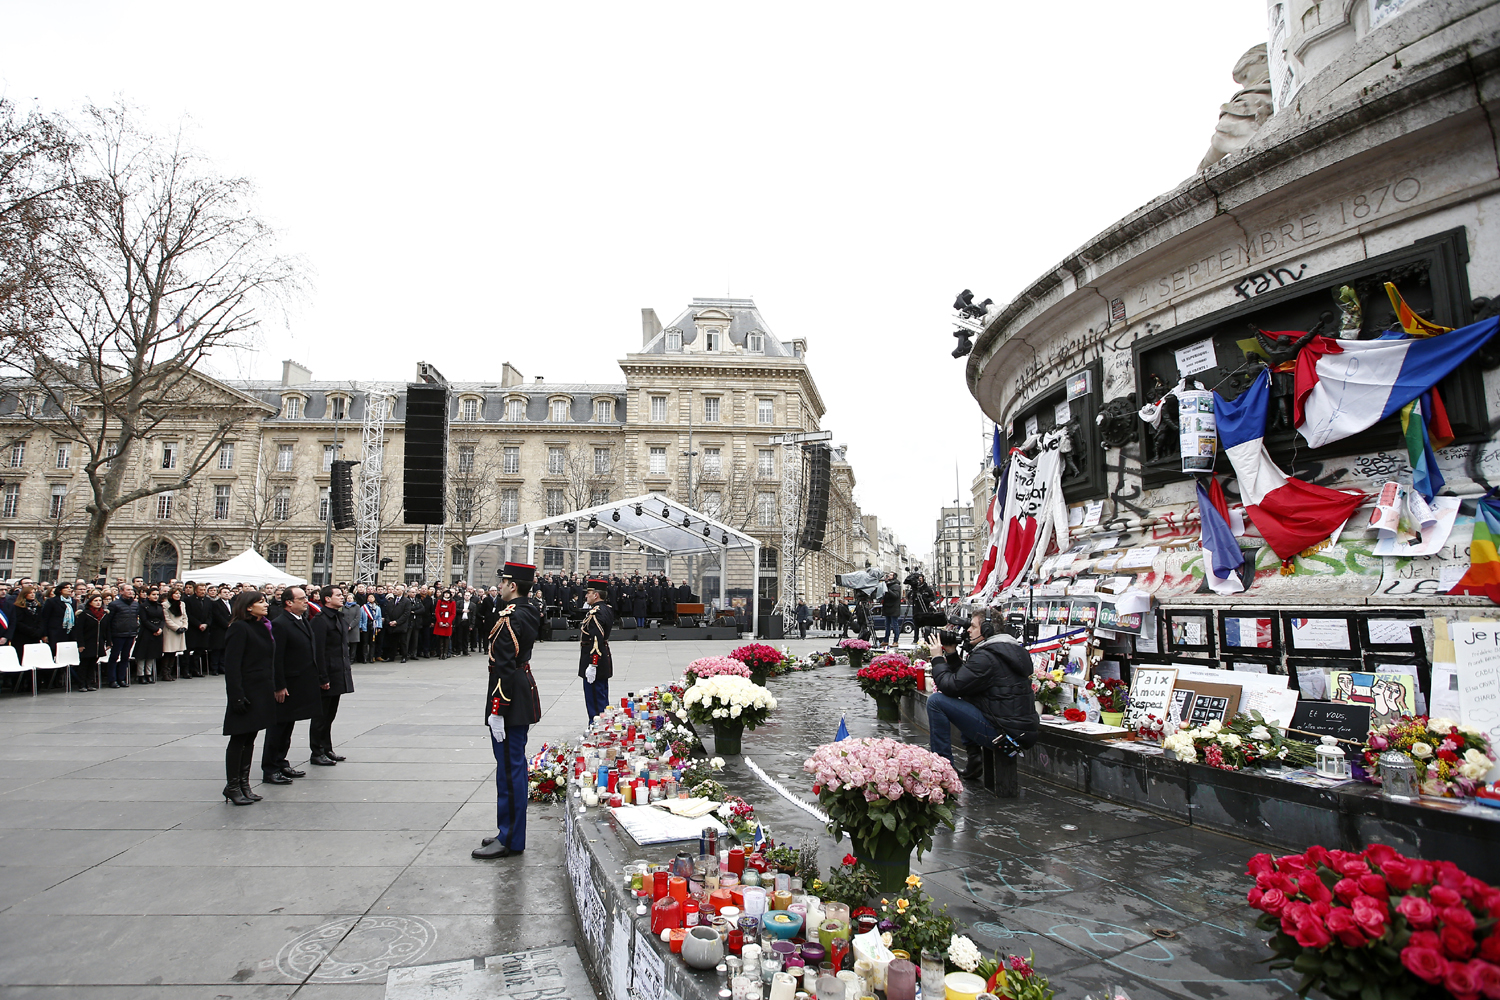 (From L) Mayor of Paris Anne Hidalgo, French President Francois Hollande and French Prime Minister Manuel Valls attend a remembrance rally at Place de la Republique (Republic square) on January 10, 2016 to mark a year since 1.6 million people thronged the French capital in a show of unity after attacks on the Charlie Hebdo newspaper and a Jewish supermarket. Just as it was last year, the vast Place de la Republique will be the focus of the gathering as people reiterate their support for freedom of expression and remember the other victims of what would become a year of jihadist outrages in France, culminating in the November 13 coordinated shootings and suicide bombings that killed 130 people and were claimed by the Islamic State (IS) group. / AFP / POOL / YOAN VALAT